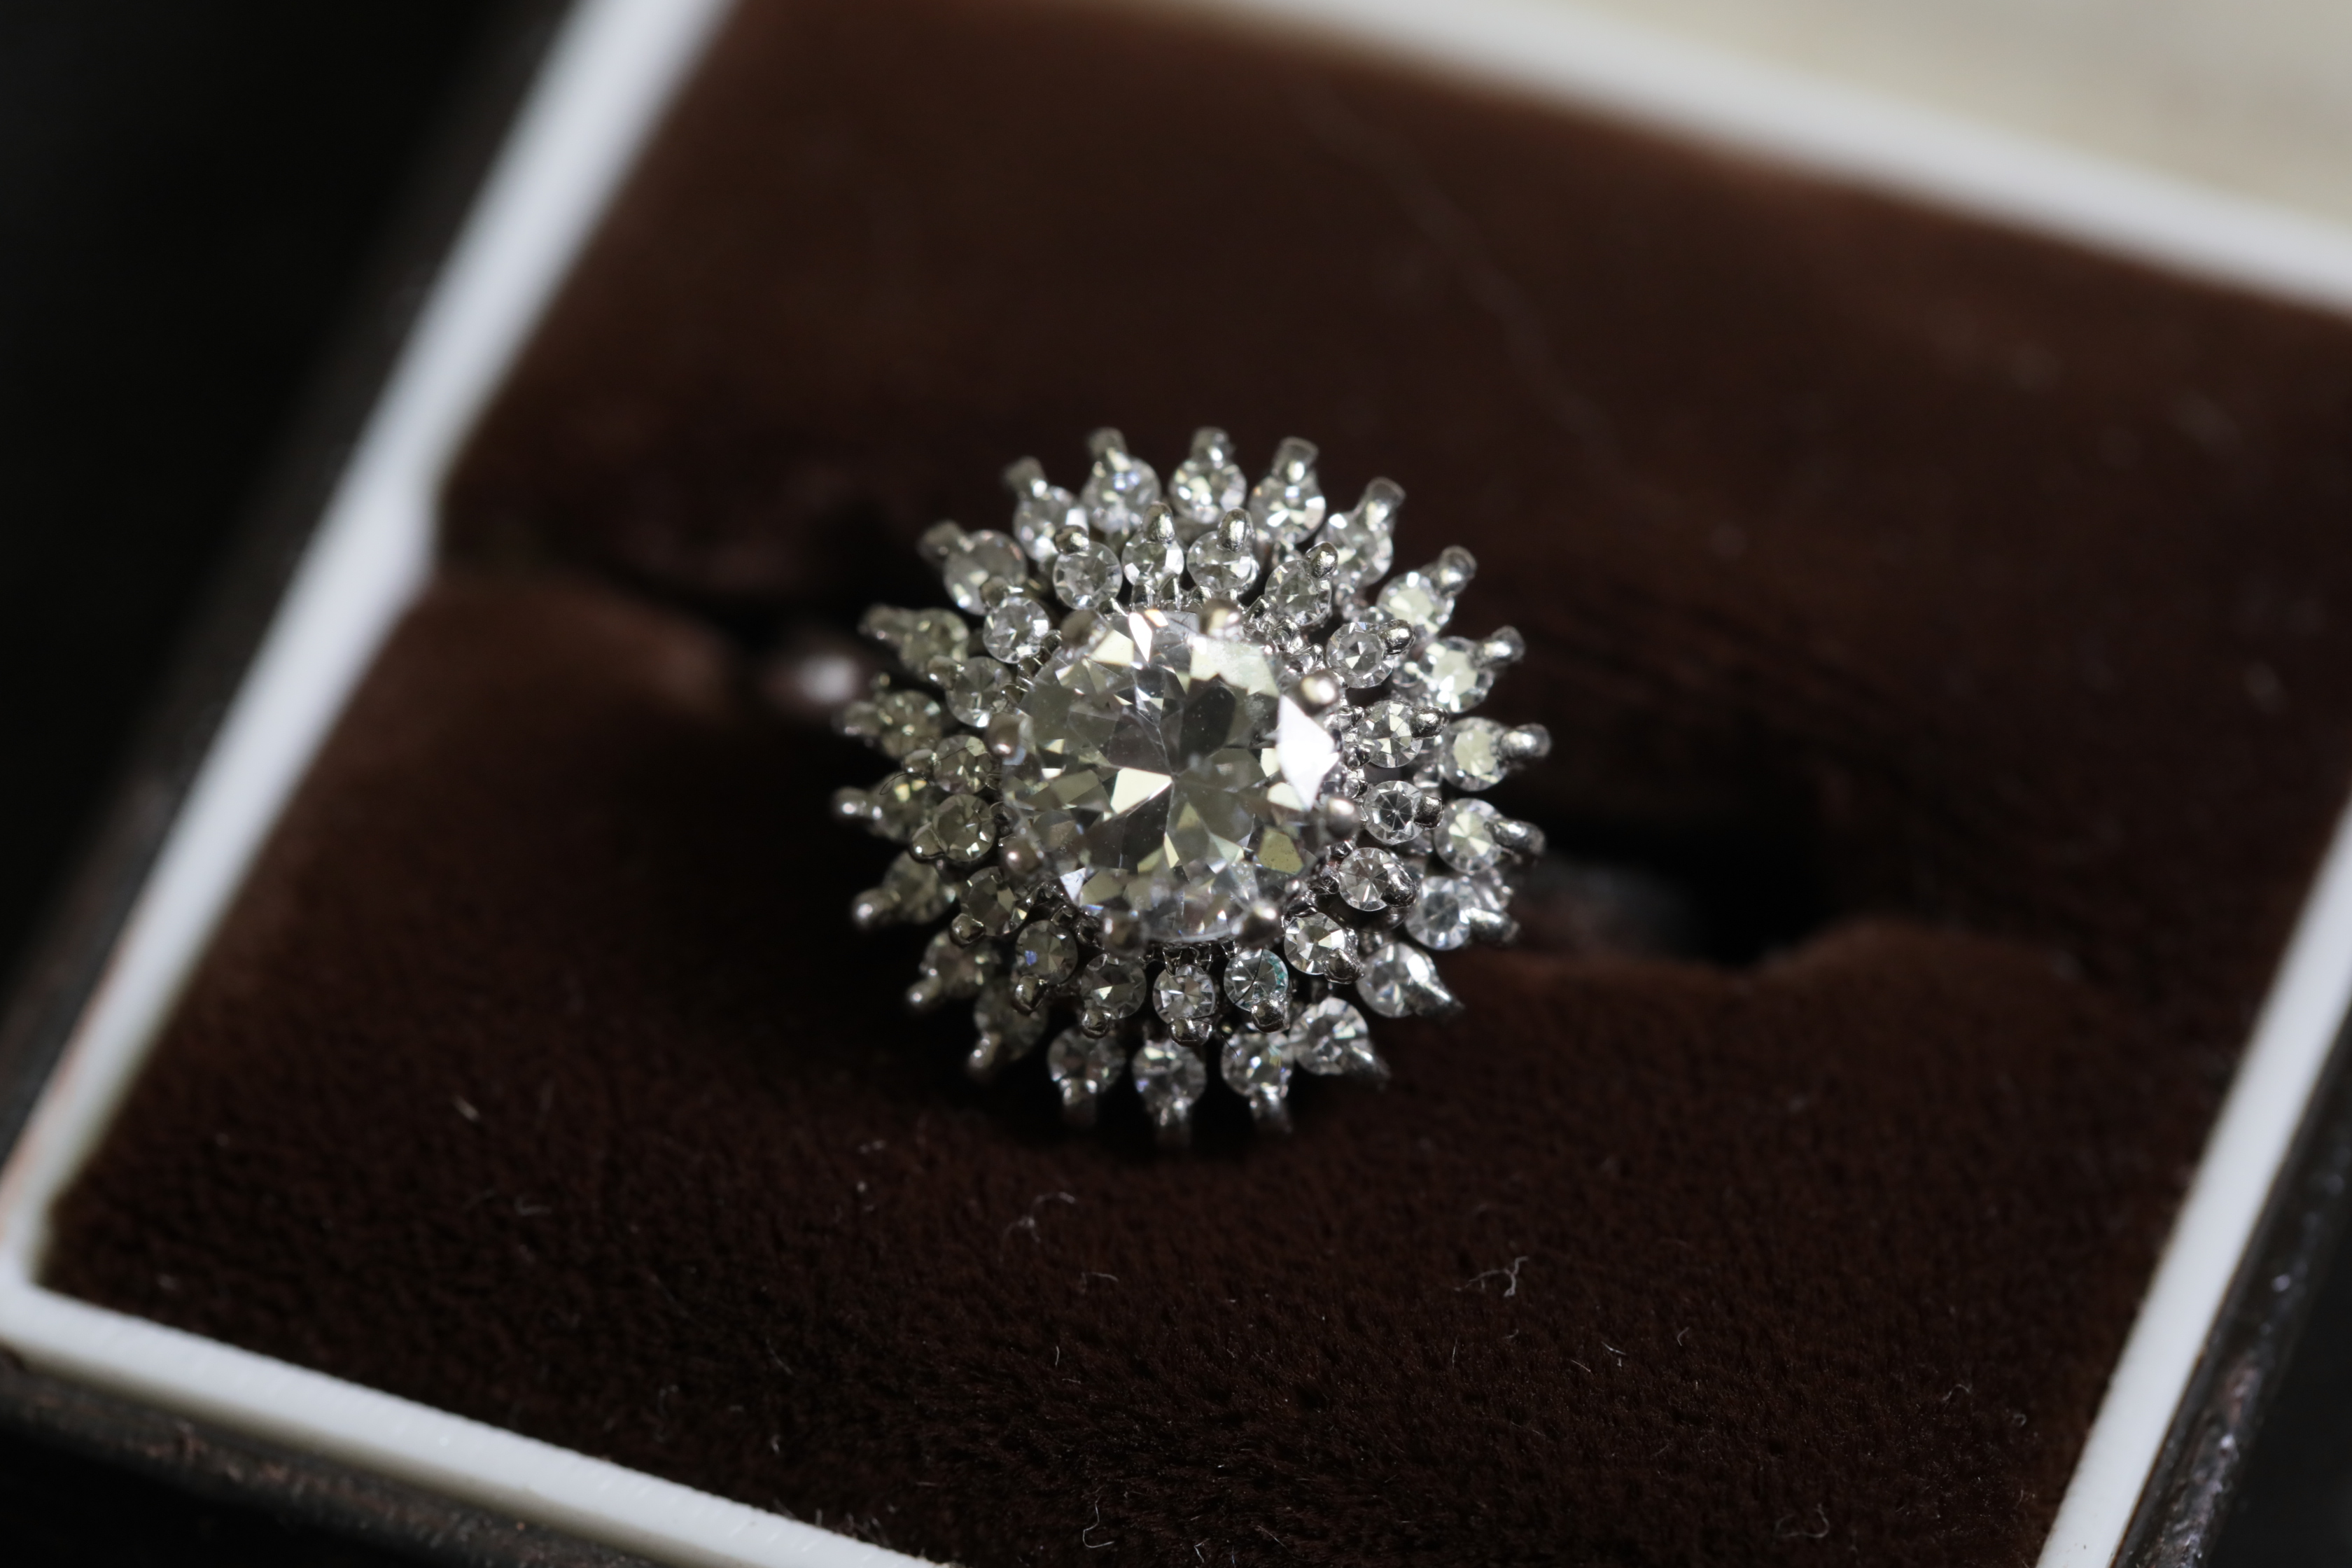 18CT Diamond Cluster Ring - Image 2 of 16